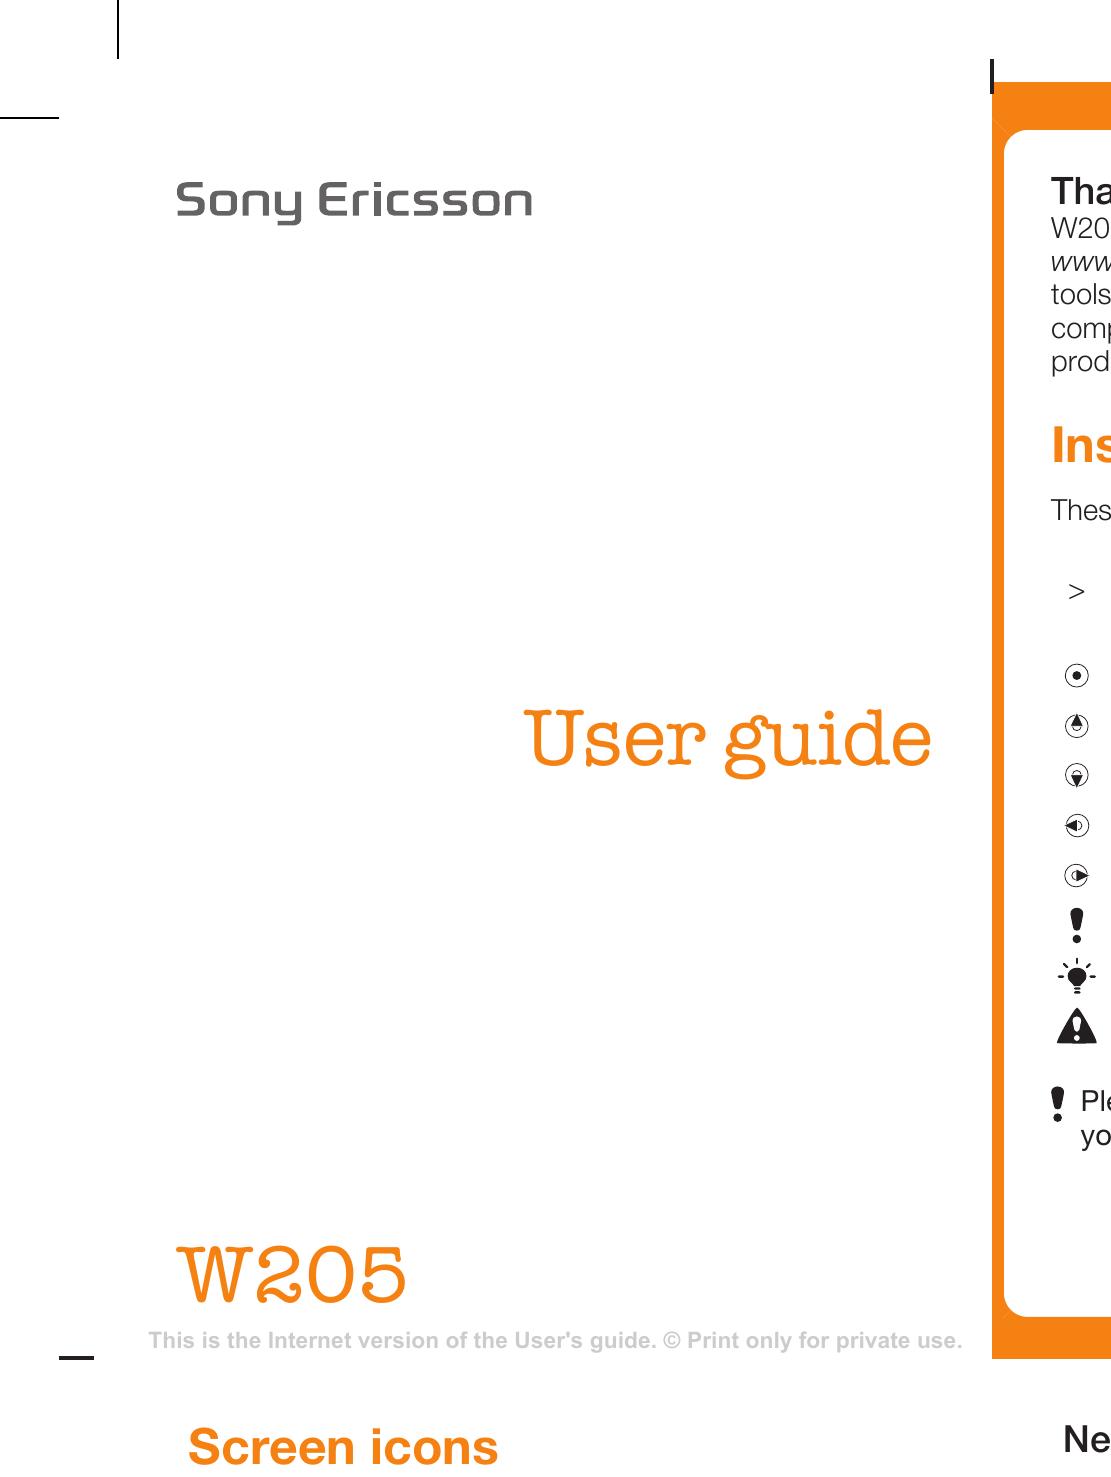 Sony Ericsson W205 Clothes Dryer User Manual